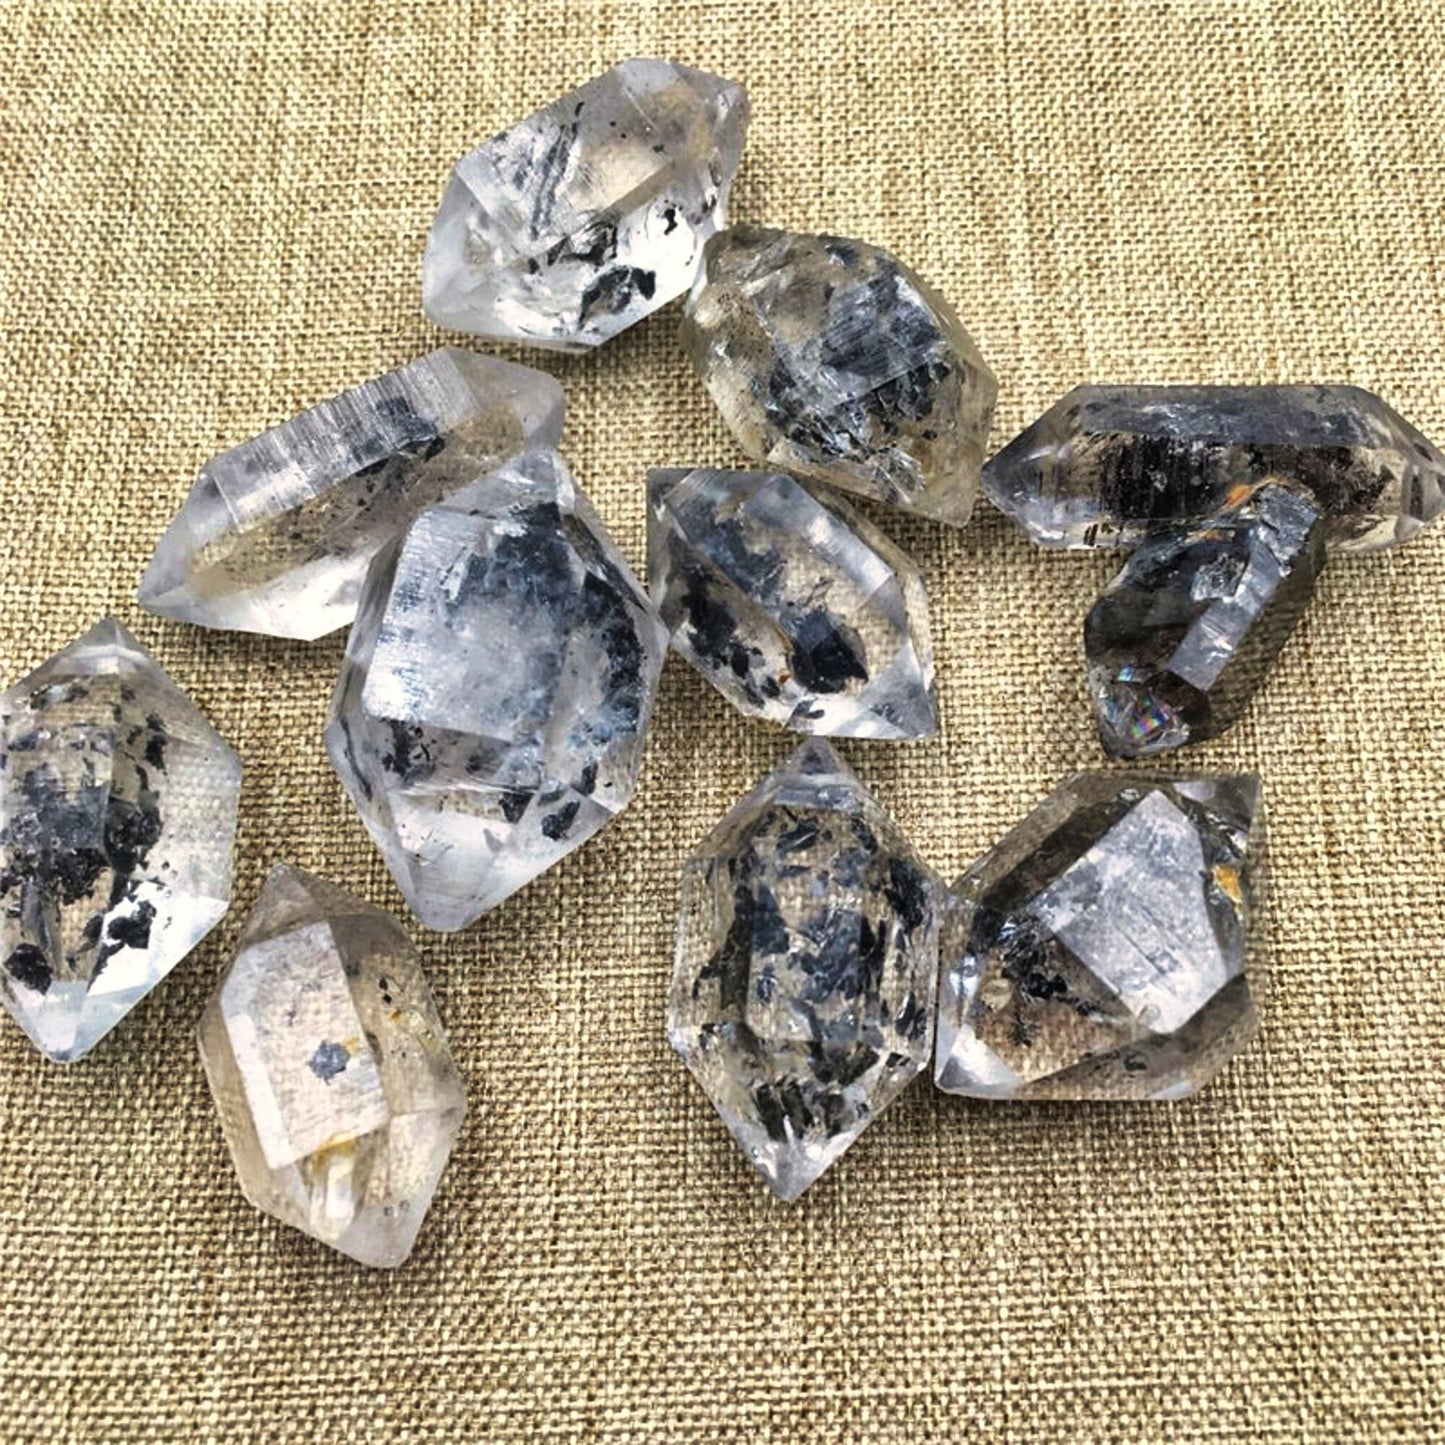 Herkimer Diamond Quartz Crystal Healing Point Specimen for Jewelry Making and Gift Giving